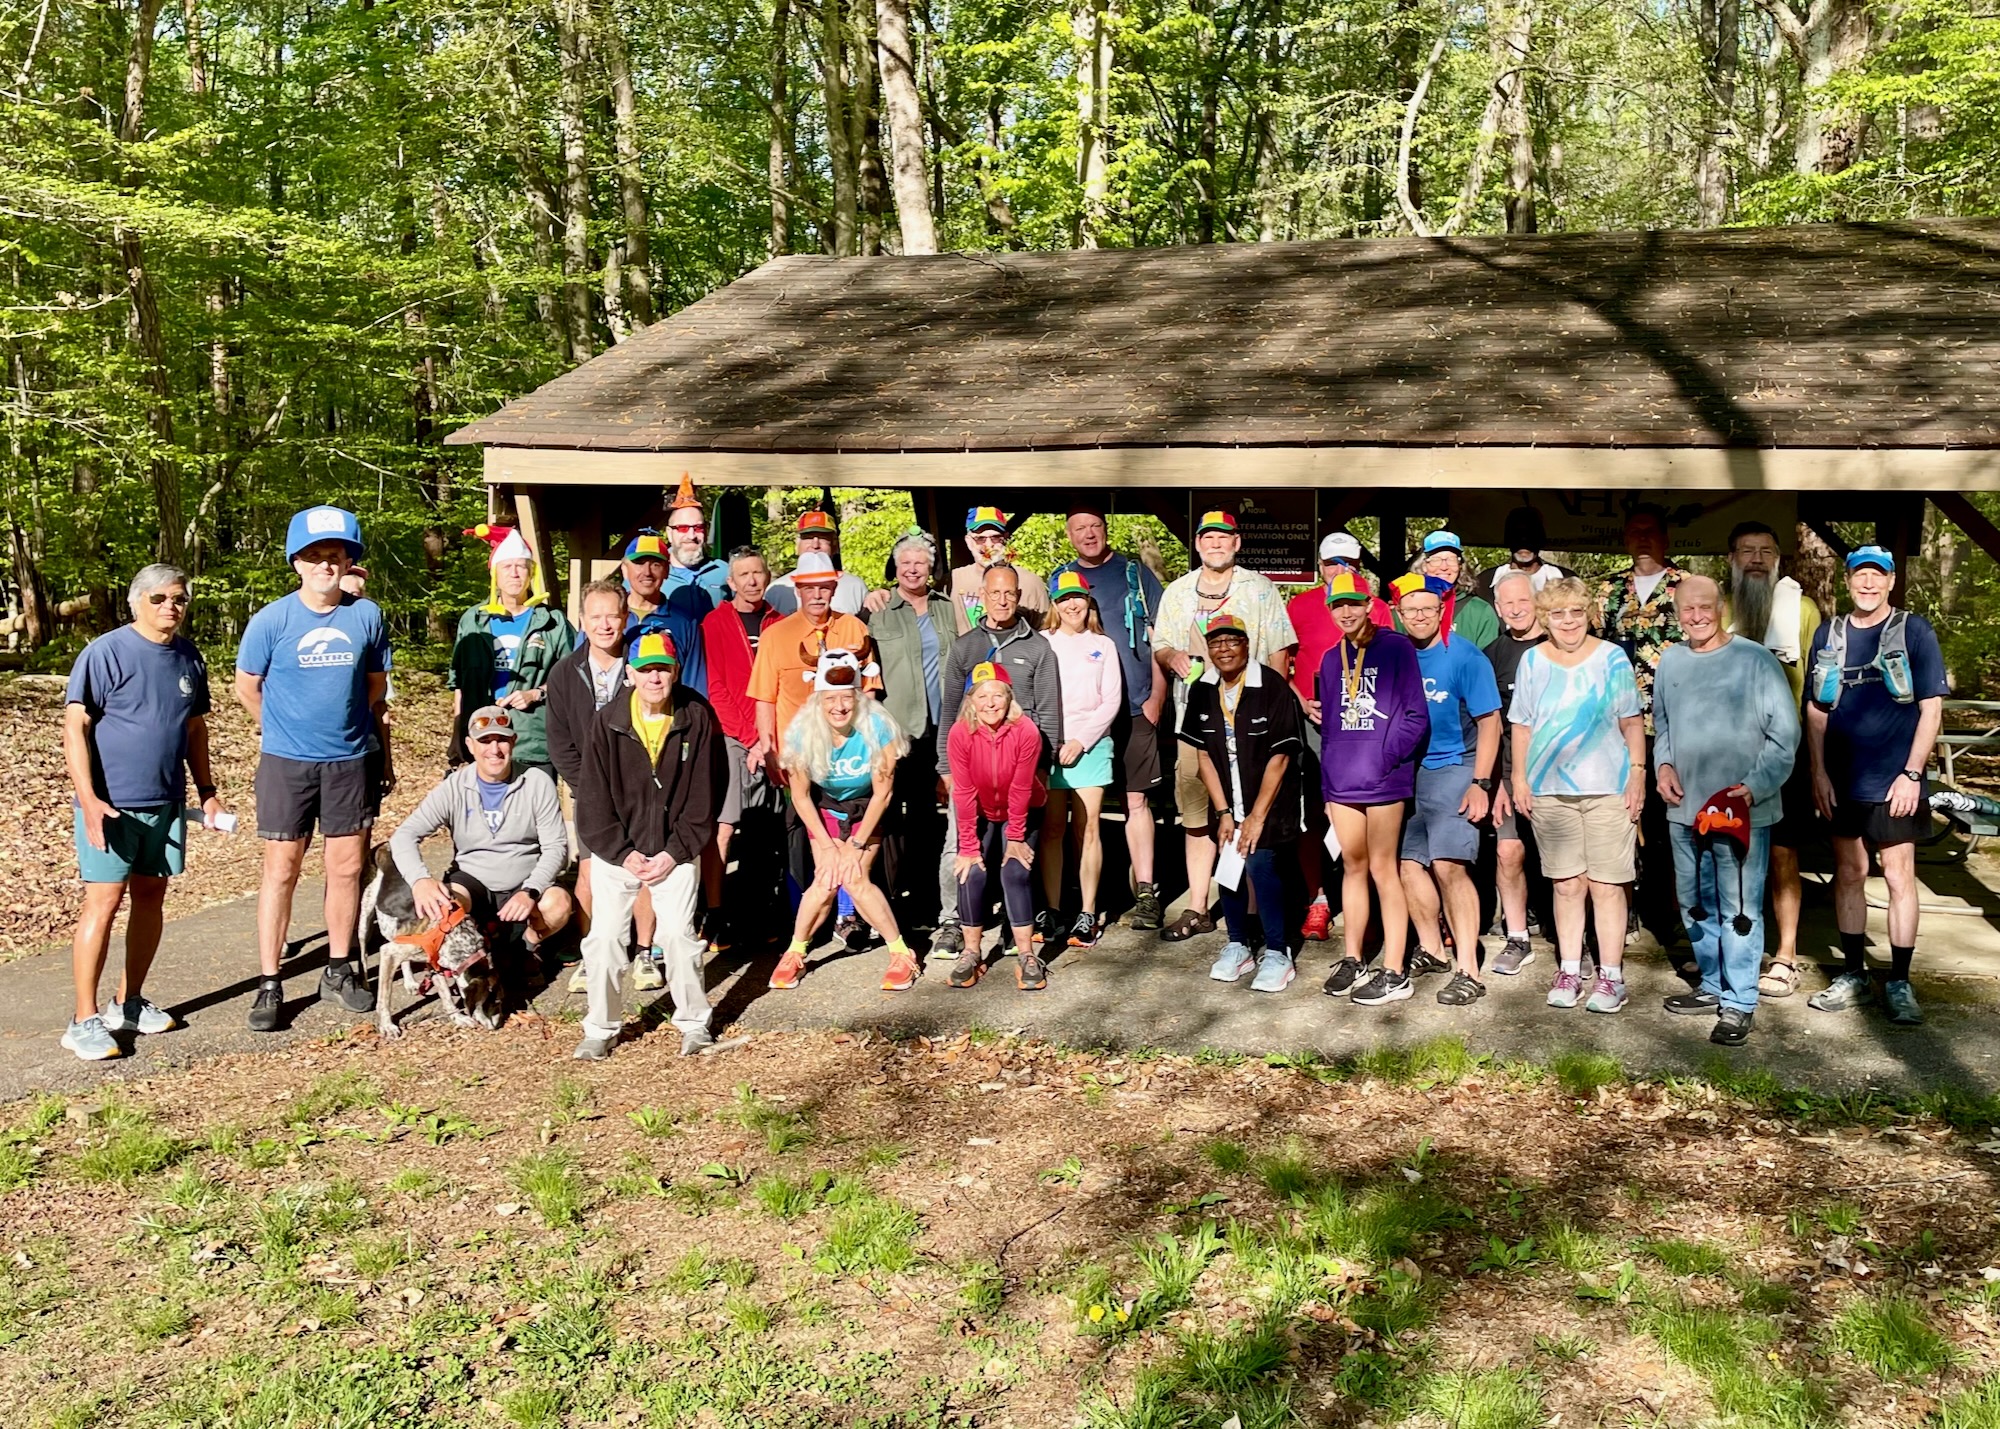 The group at the pavilion near the trailhead of the BROT